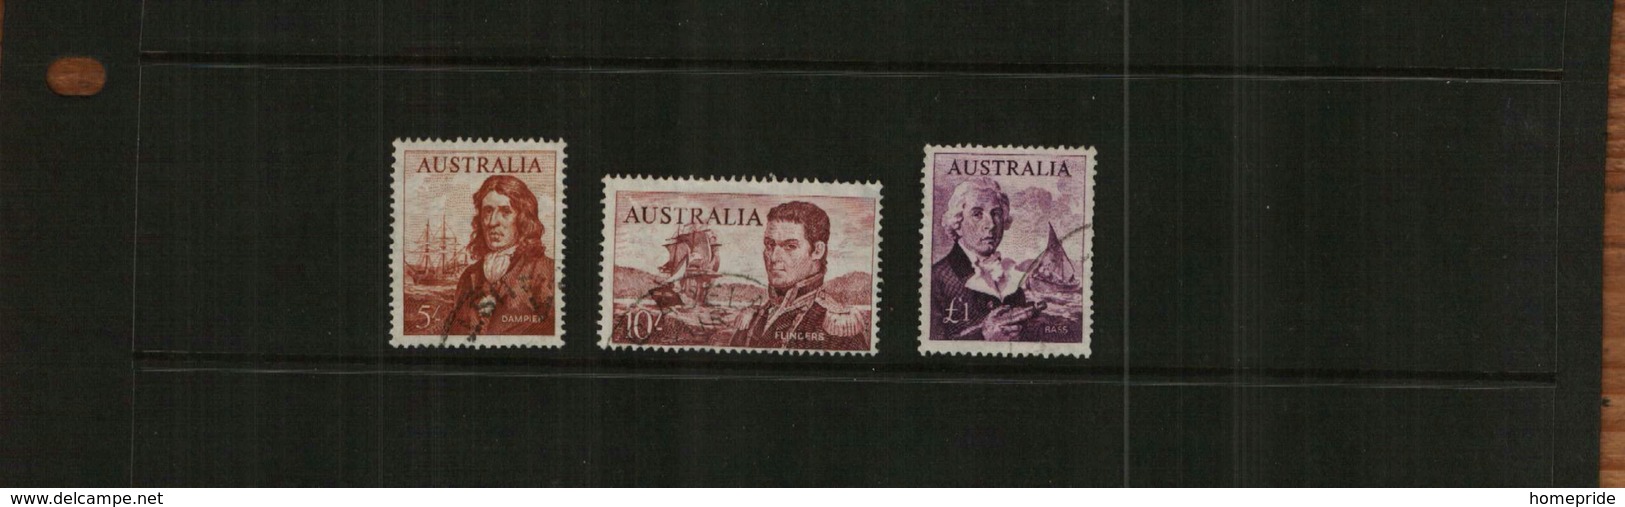 AUSTRALIA  - QE11 - 1963 - HIGH VALUES - 3 Stamps - USED - Used Stamps